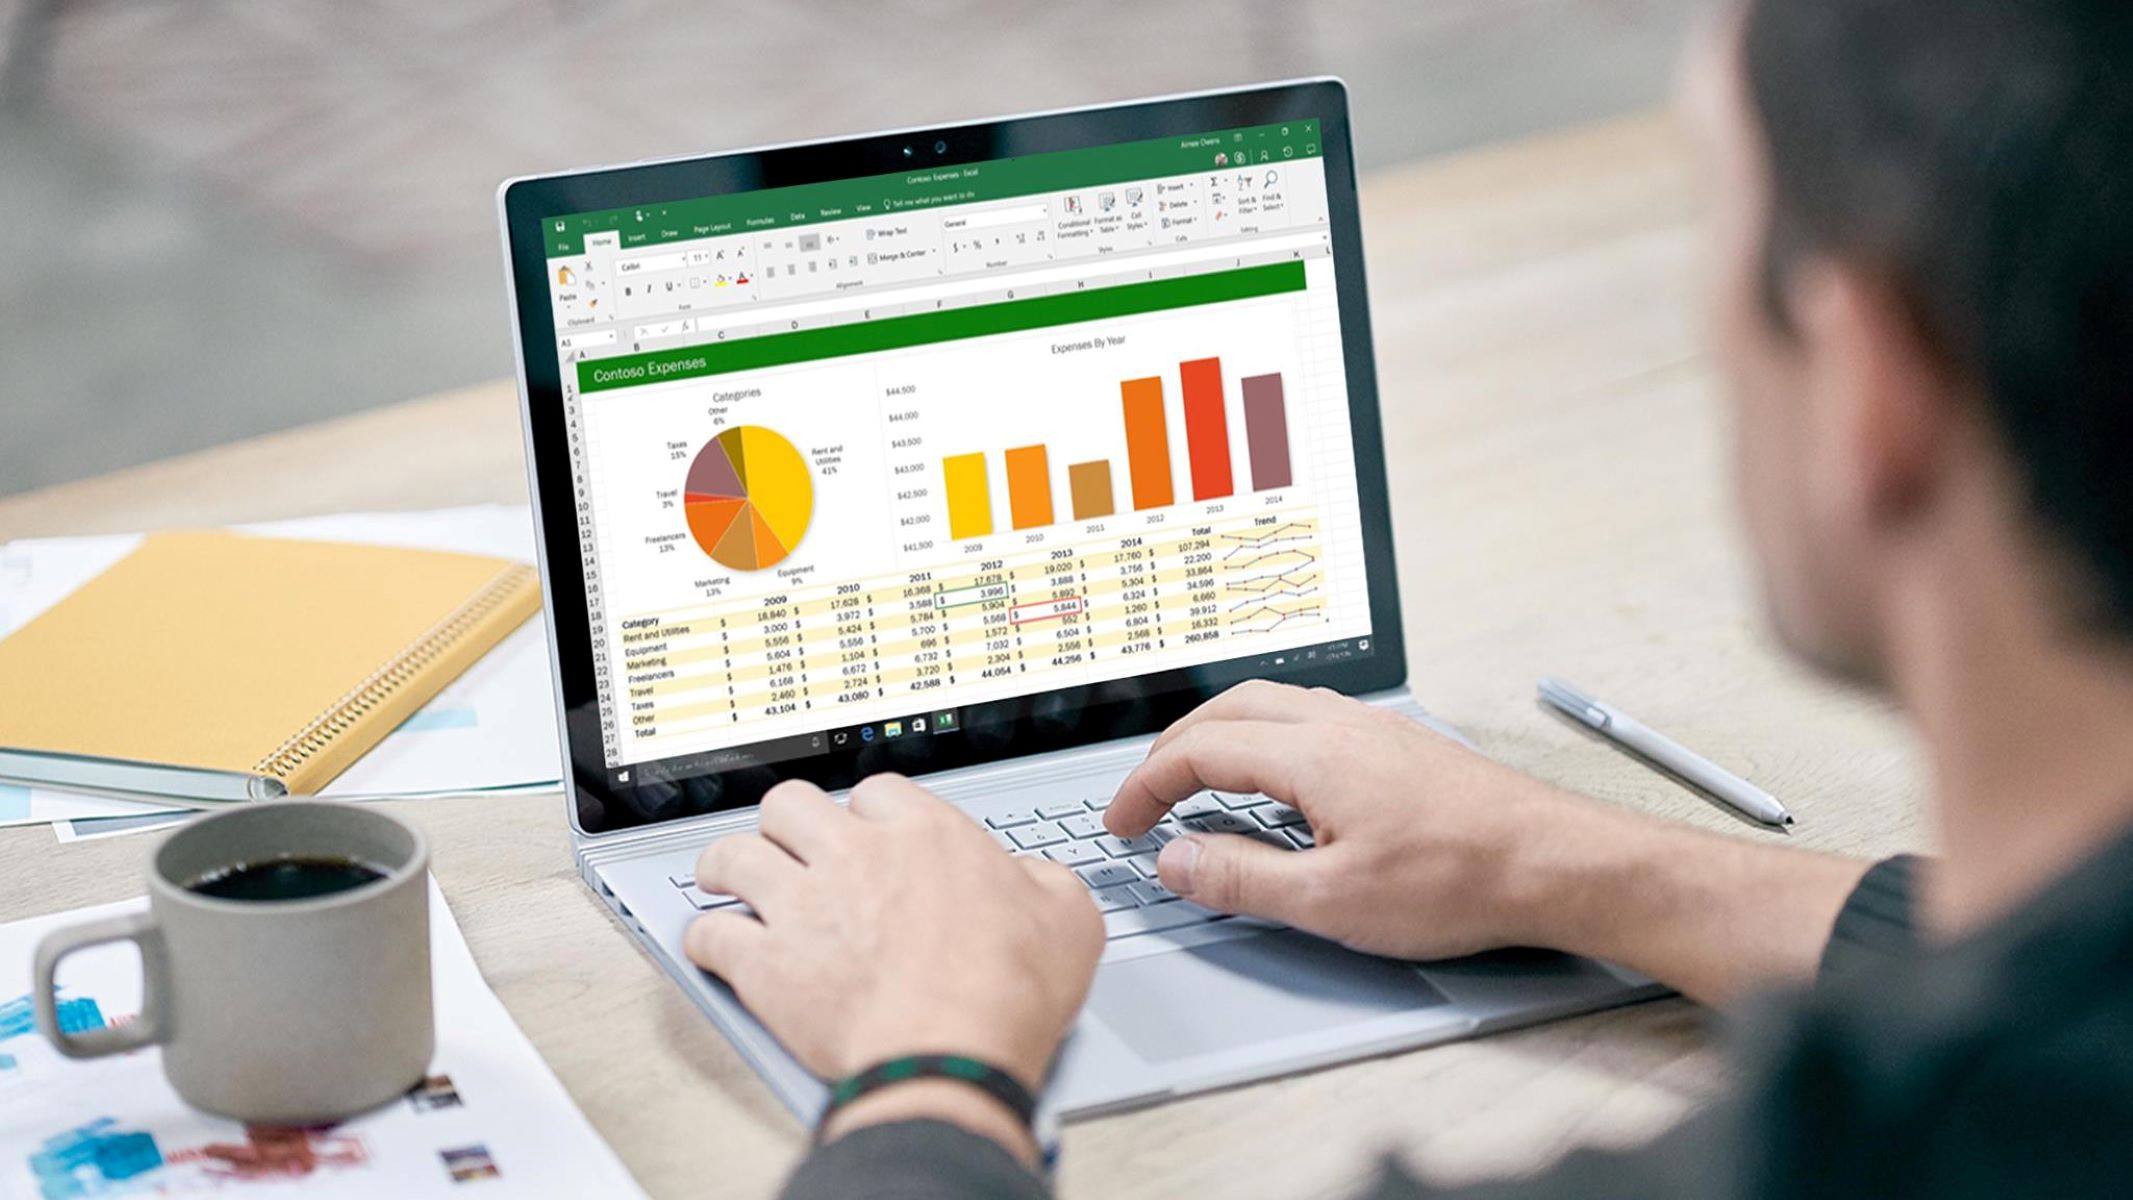 Unleash Your Creativity With These Excel Tips!